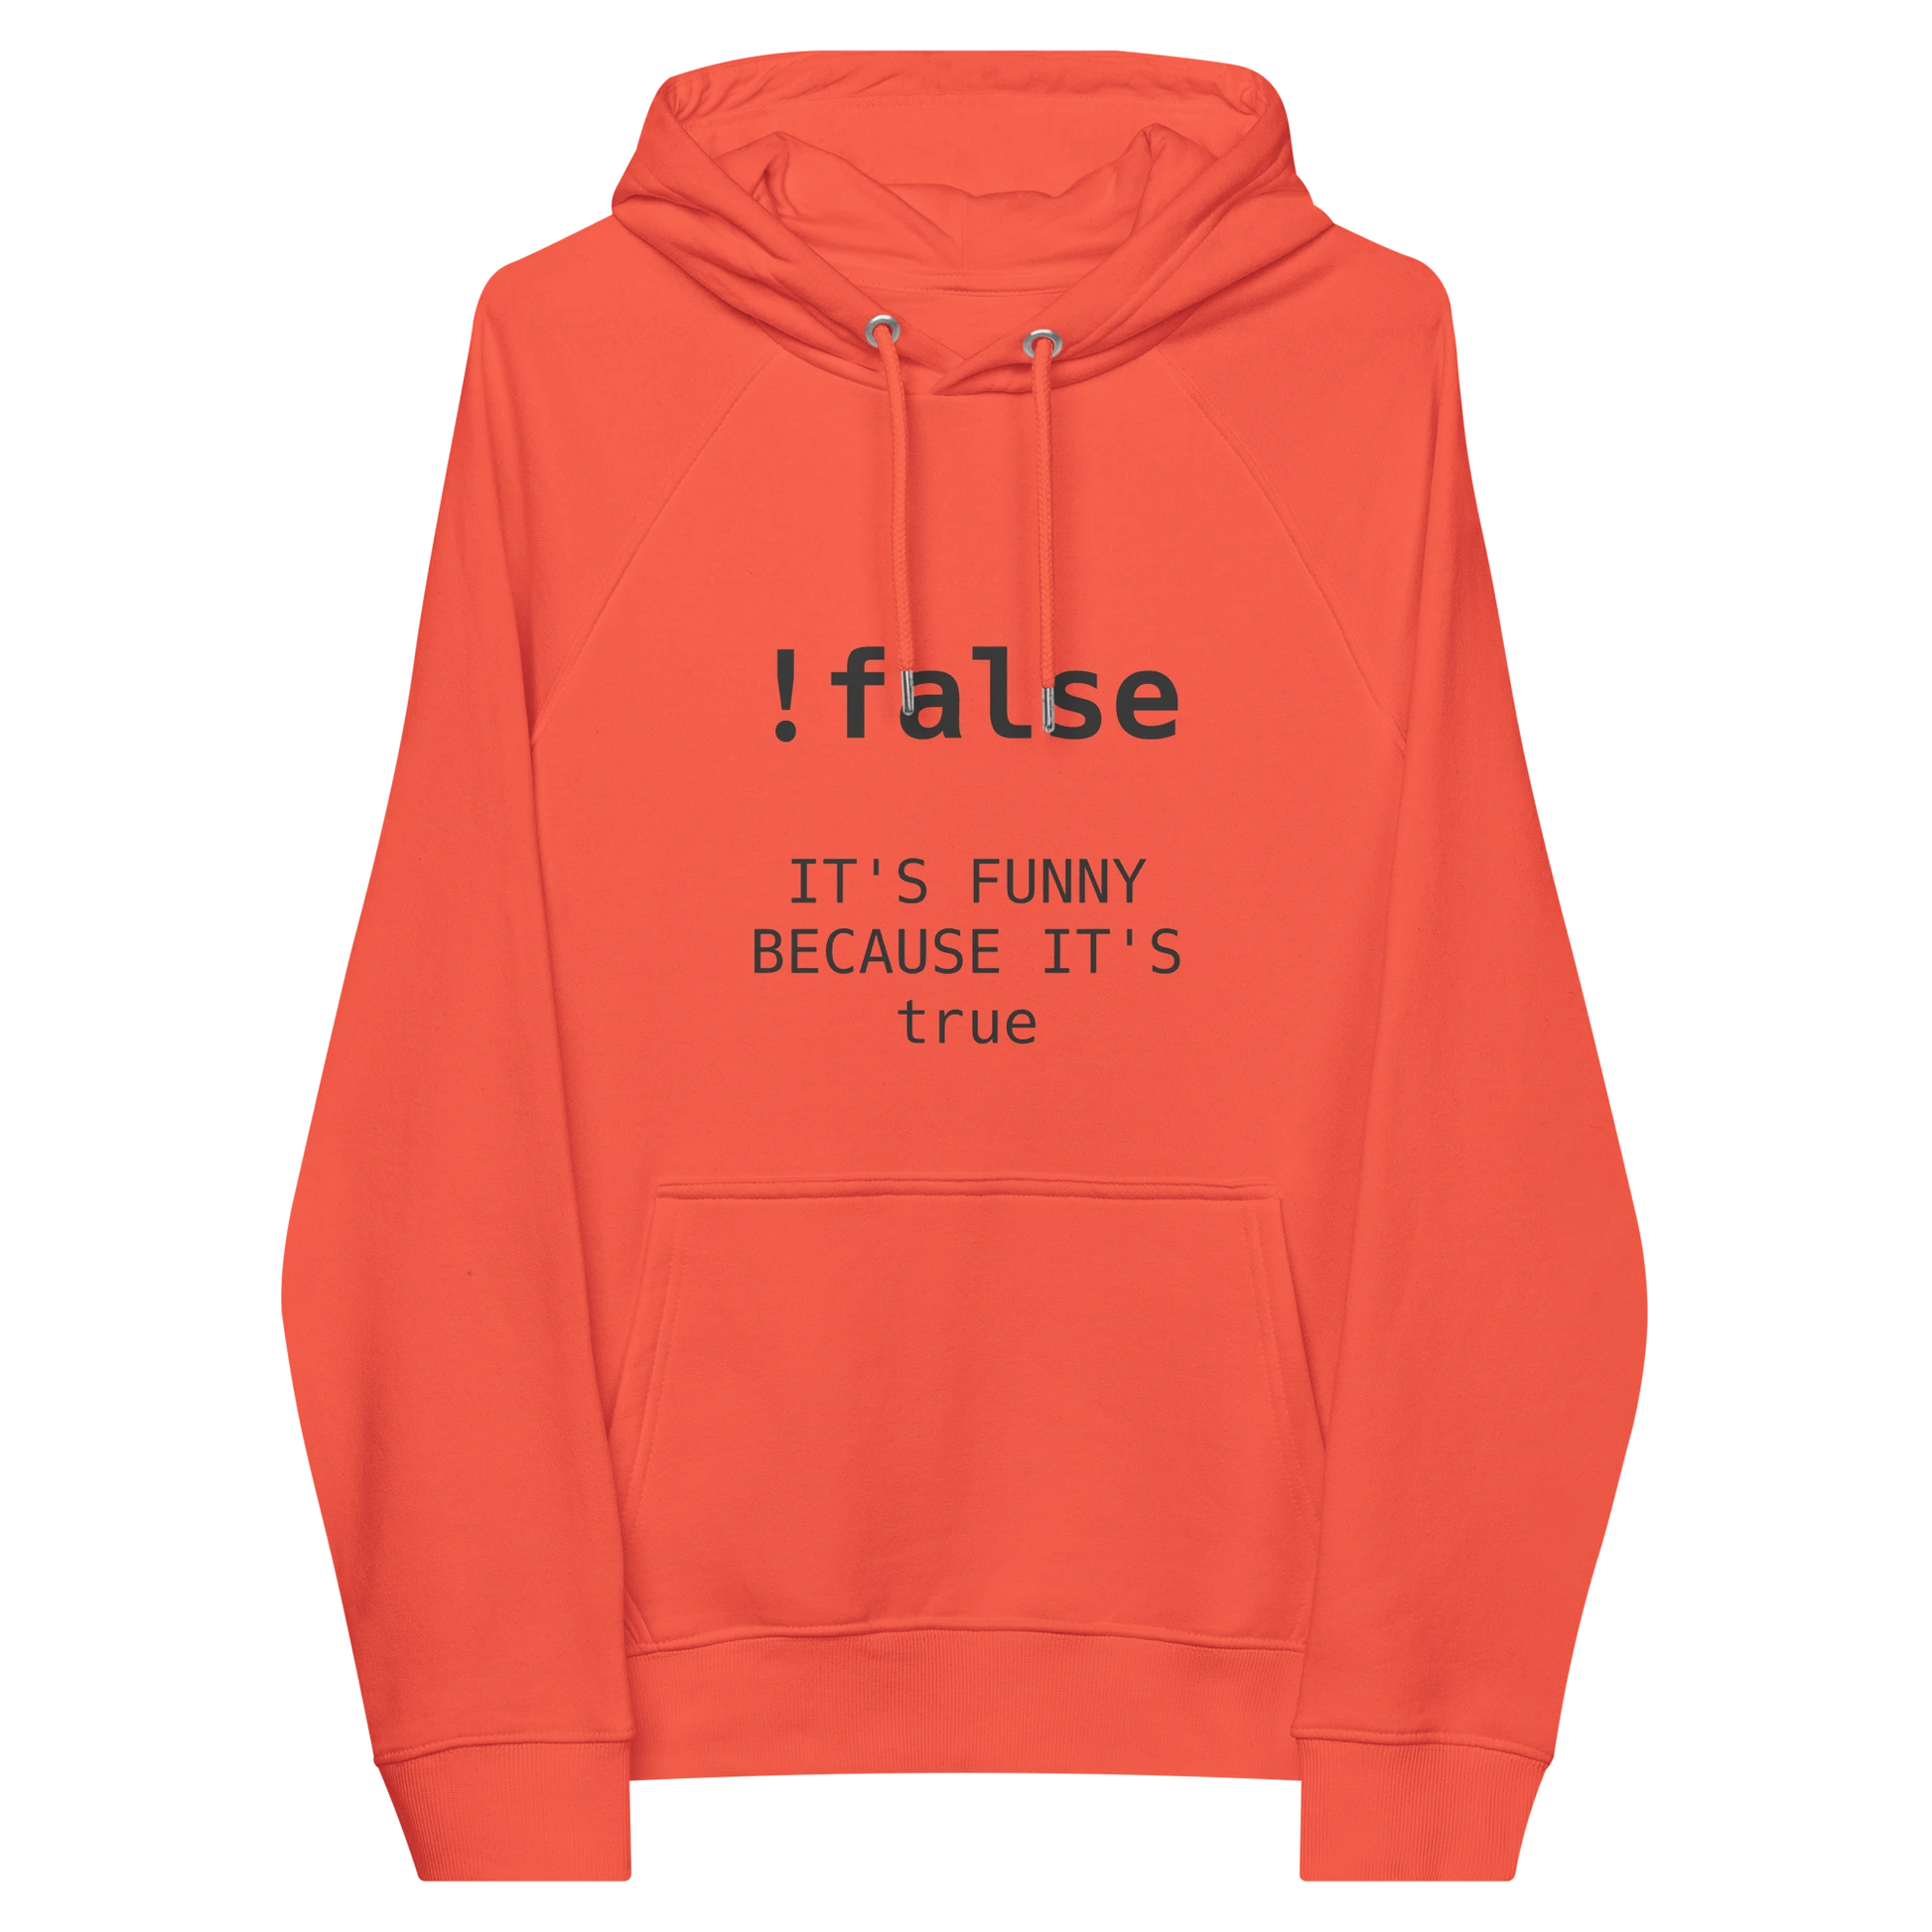 It's funny because it's true premium hoodie front flat 2 front